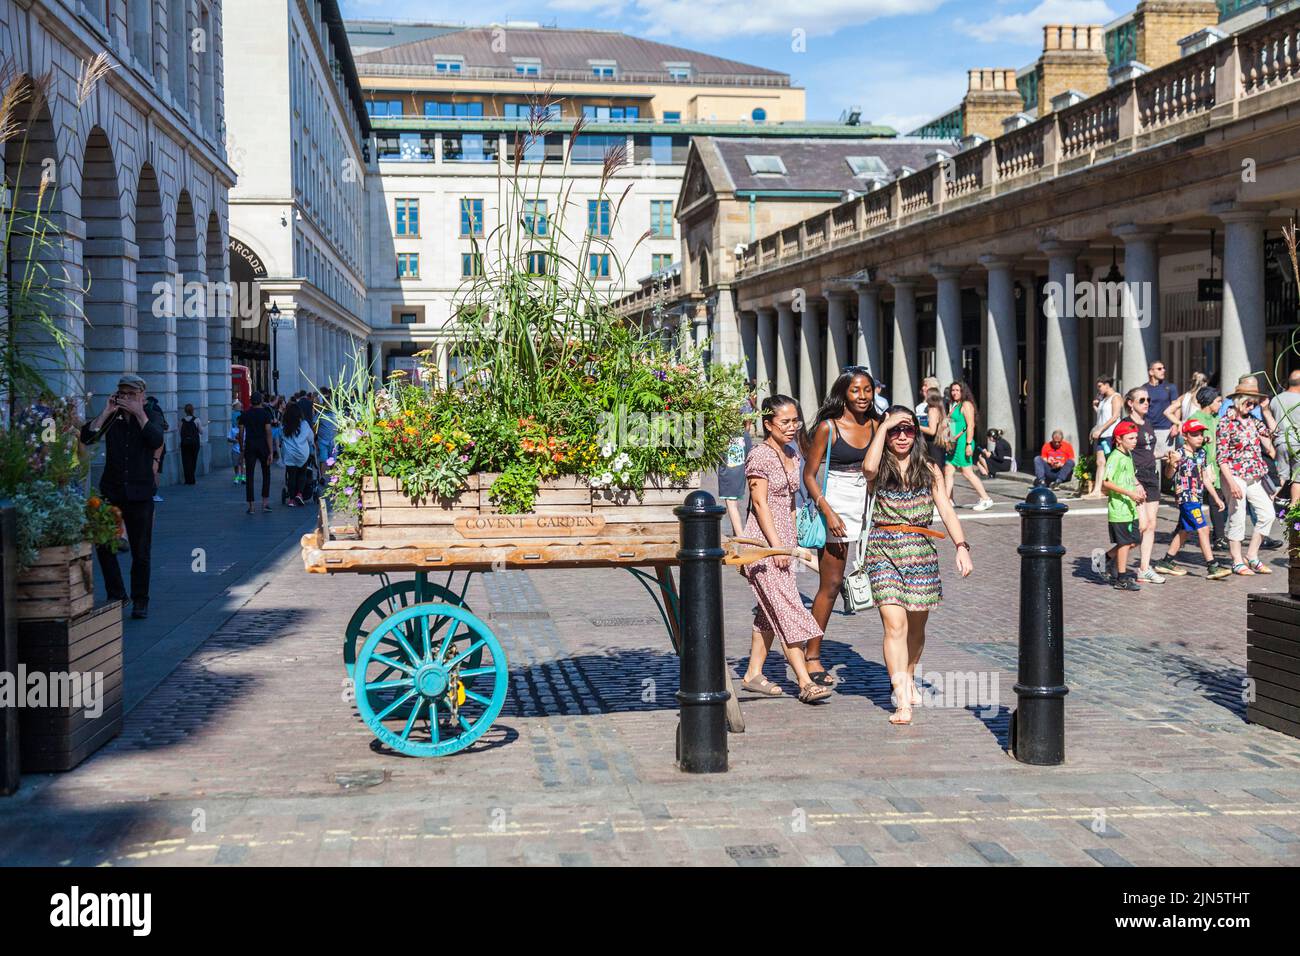 A busy street scene in Covent Garden,London,England,UK Stock Photo